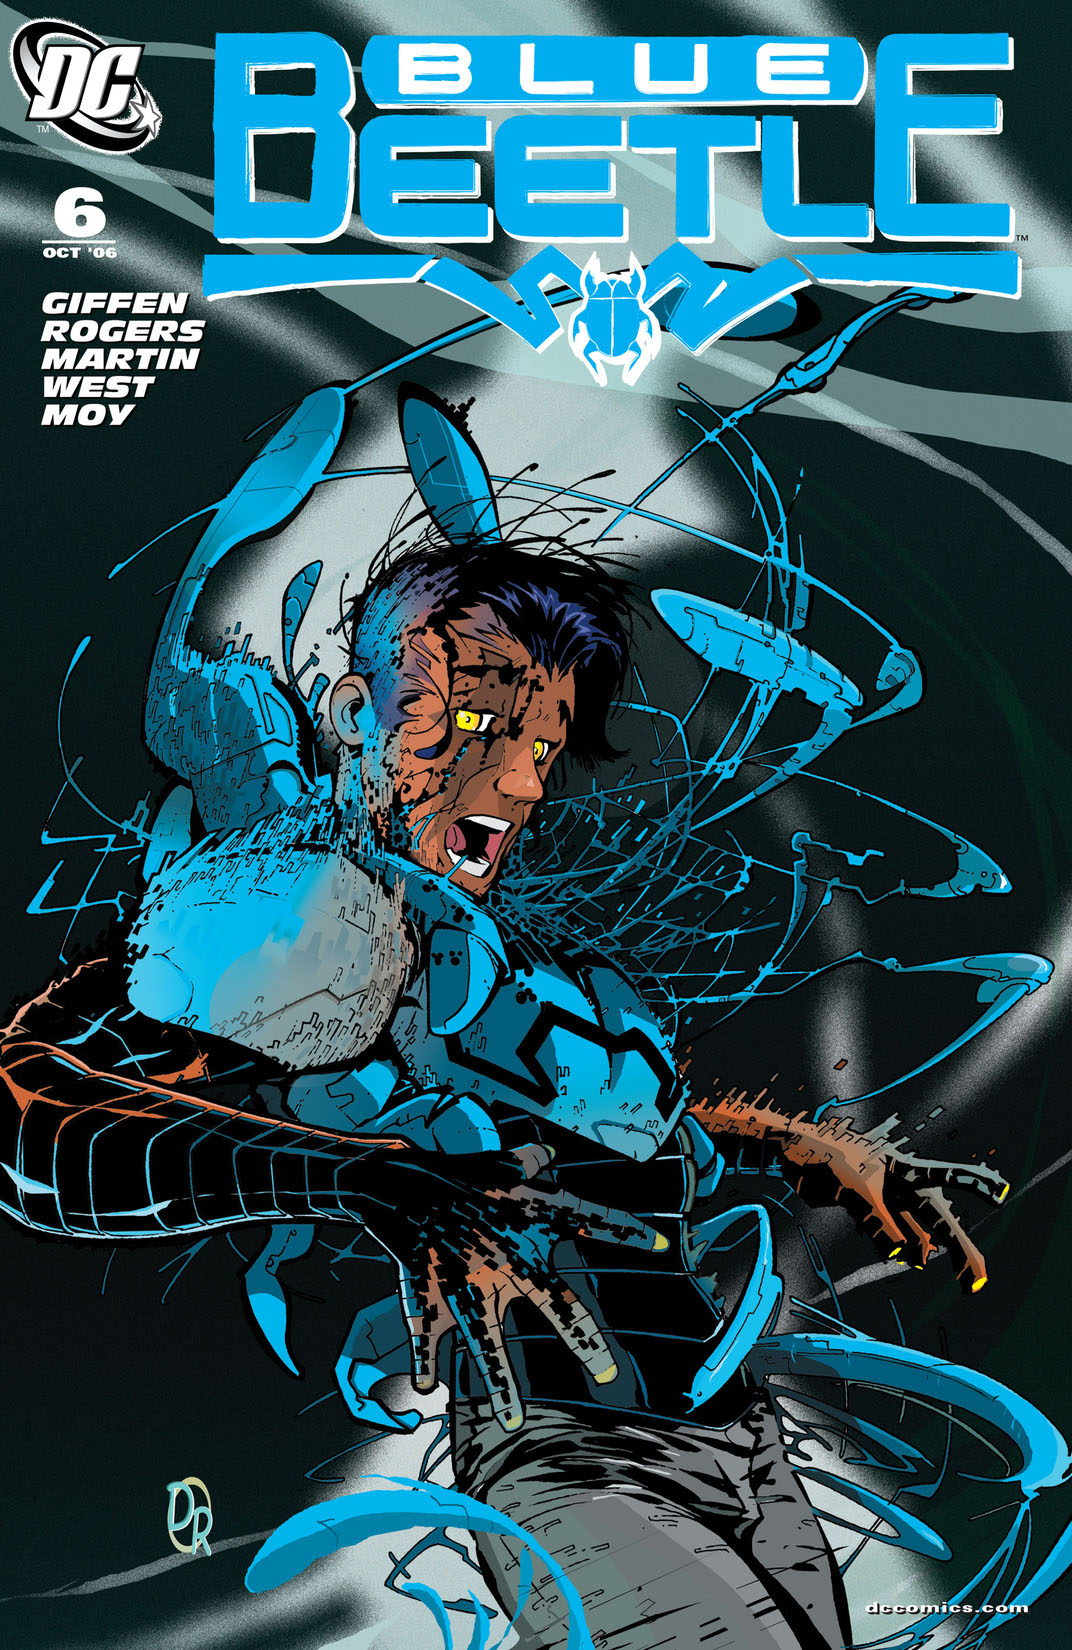 Blue Beetle (2006-) #6 preview images